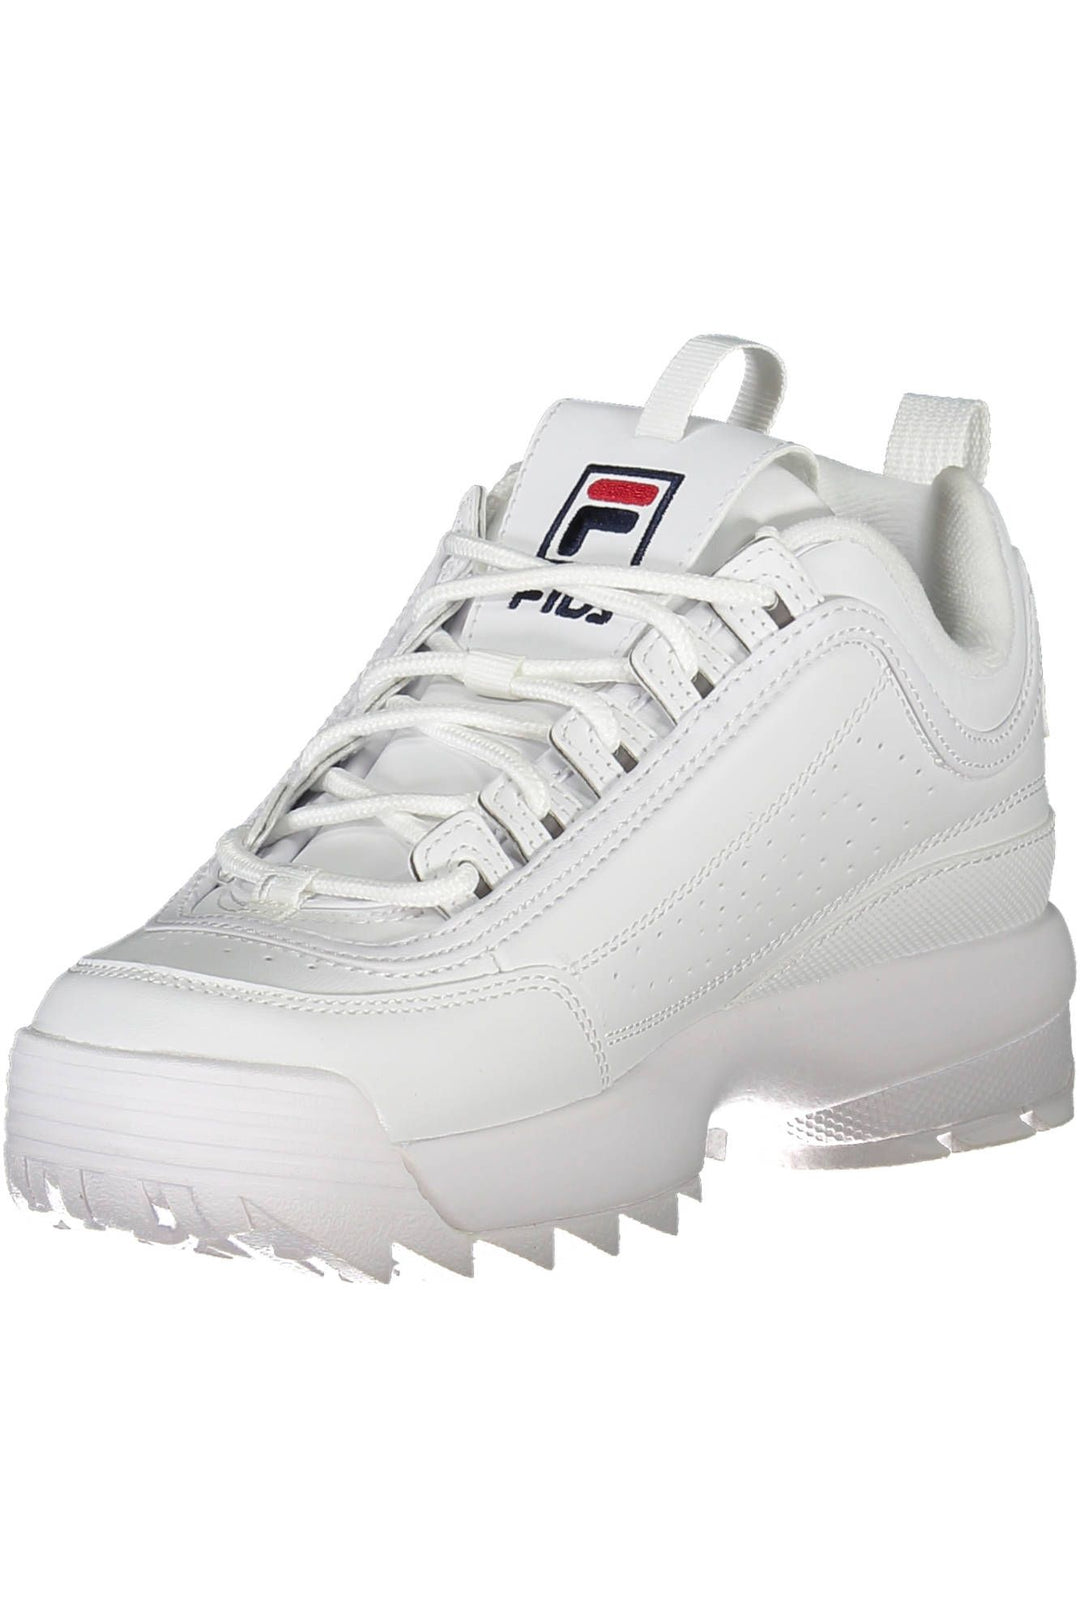 Fila Sleek White Sports Sneakers with Embroidered Accents